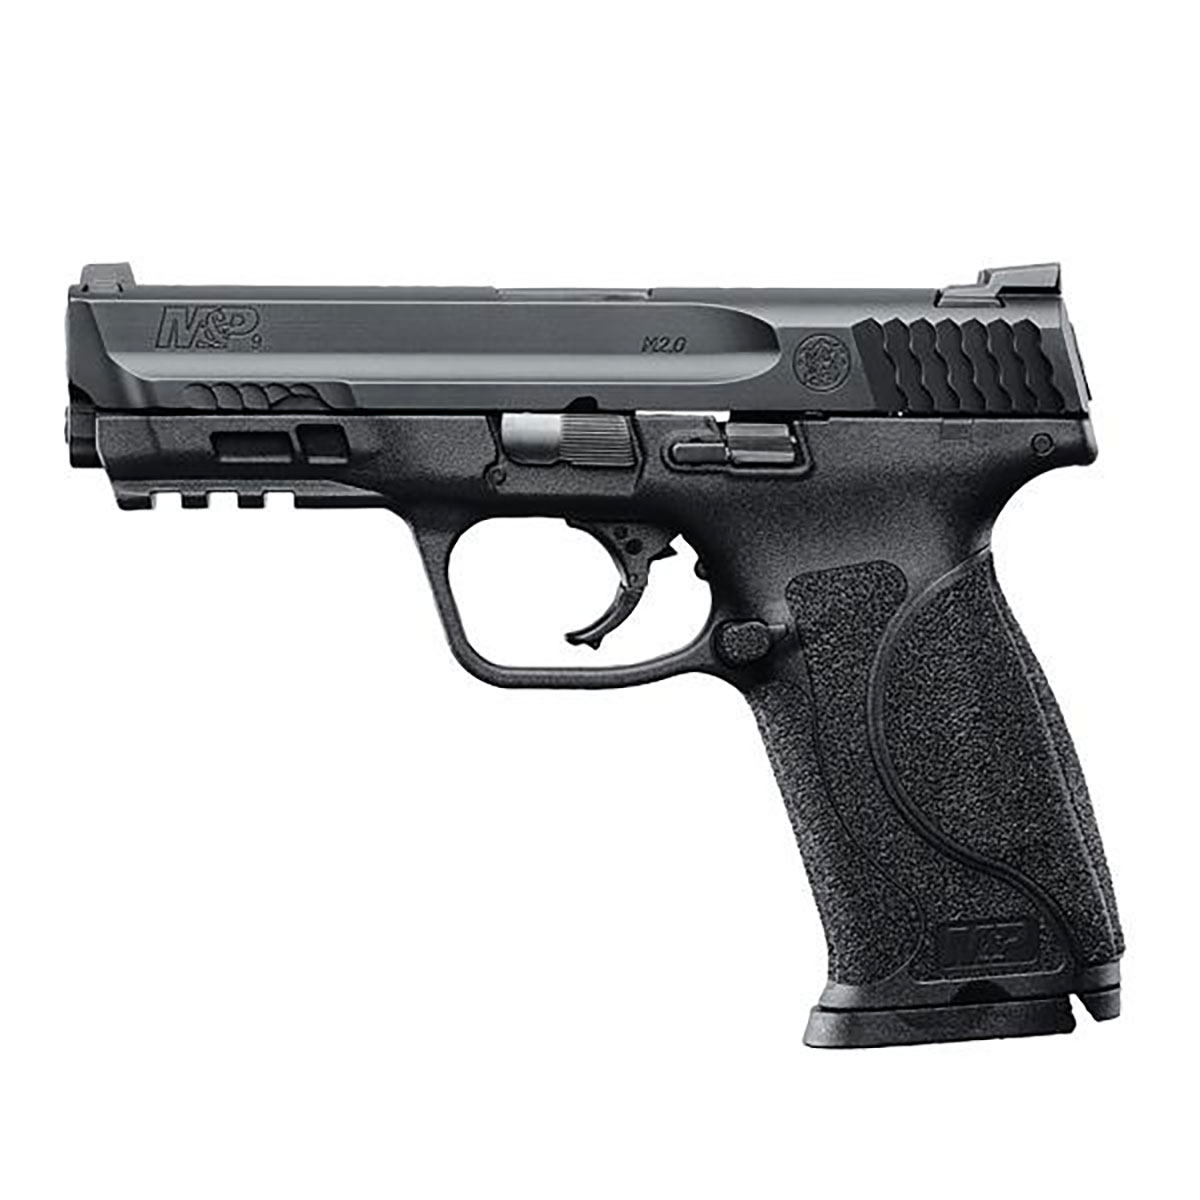 SMITH & WESSON - M&P9 M2.0 9mm 15+1